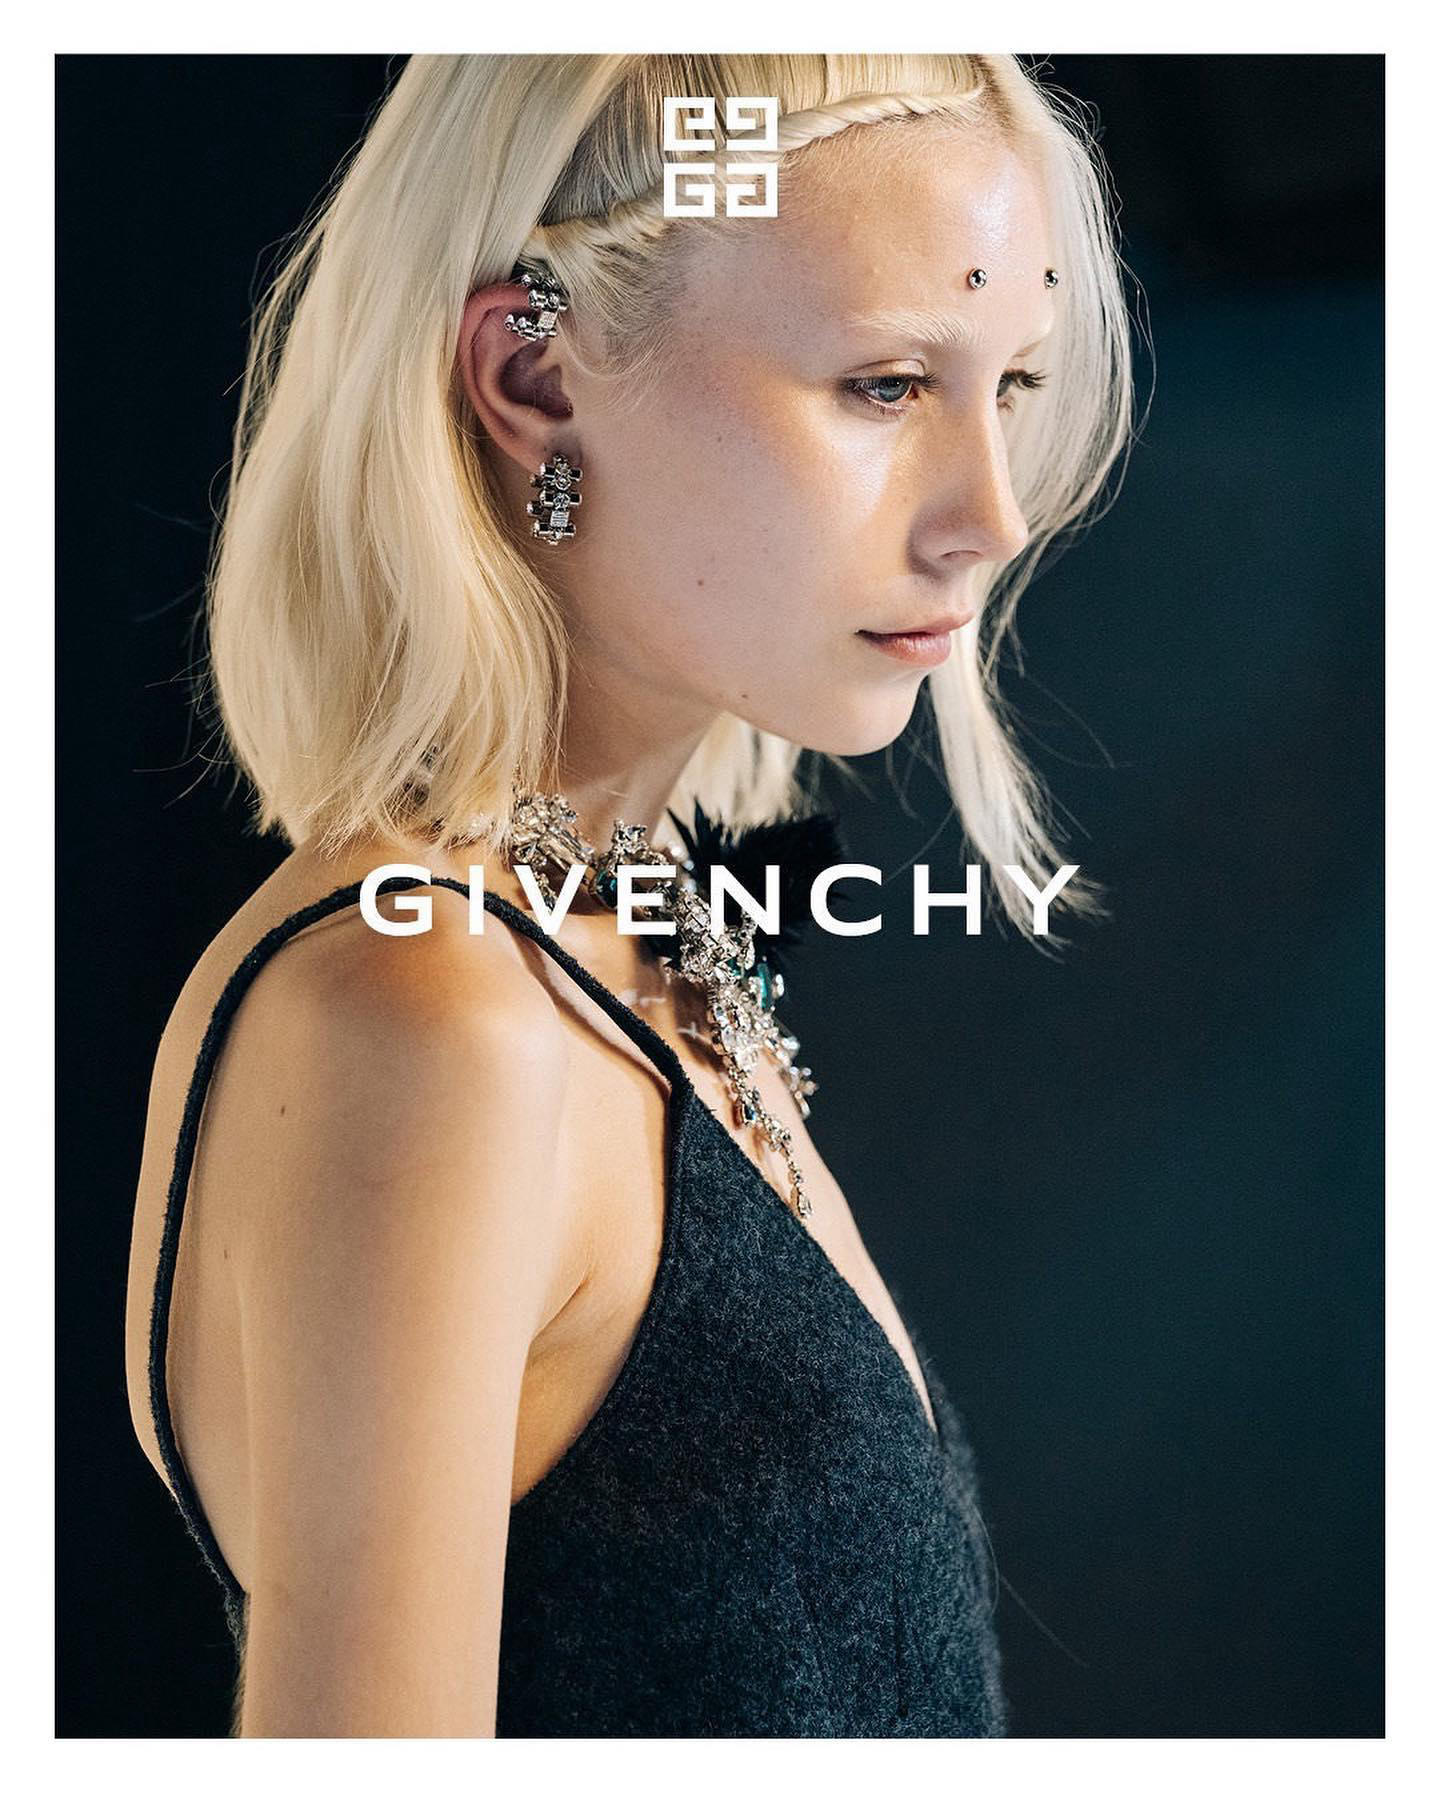 GIVENCHY - behind the scenes #givenchyfw22